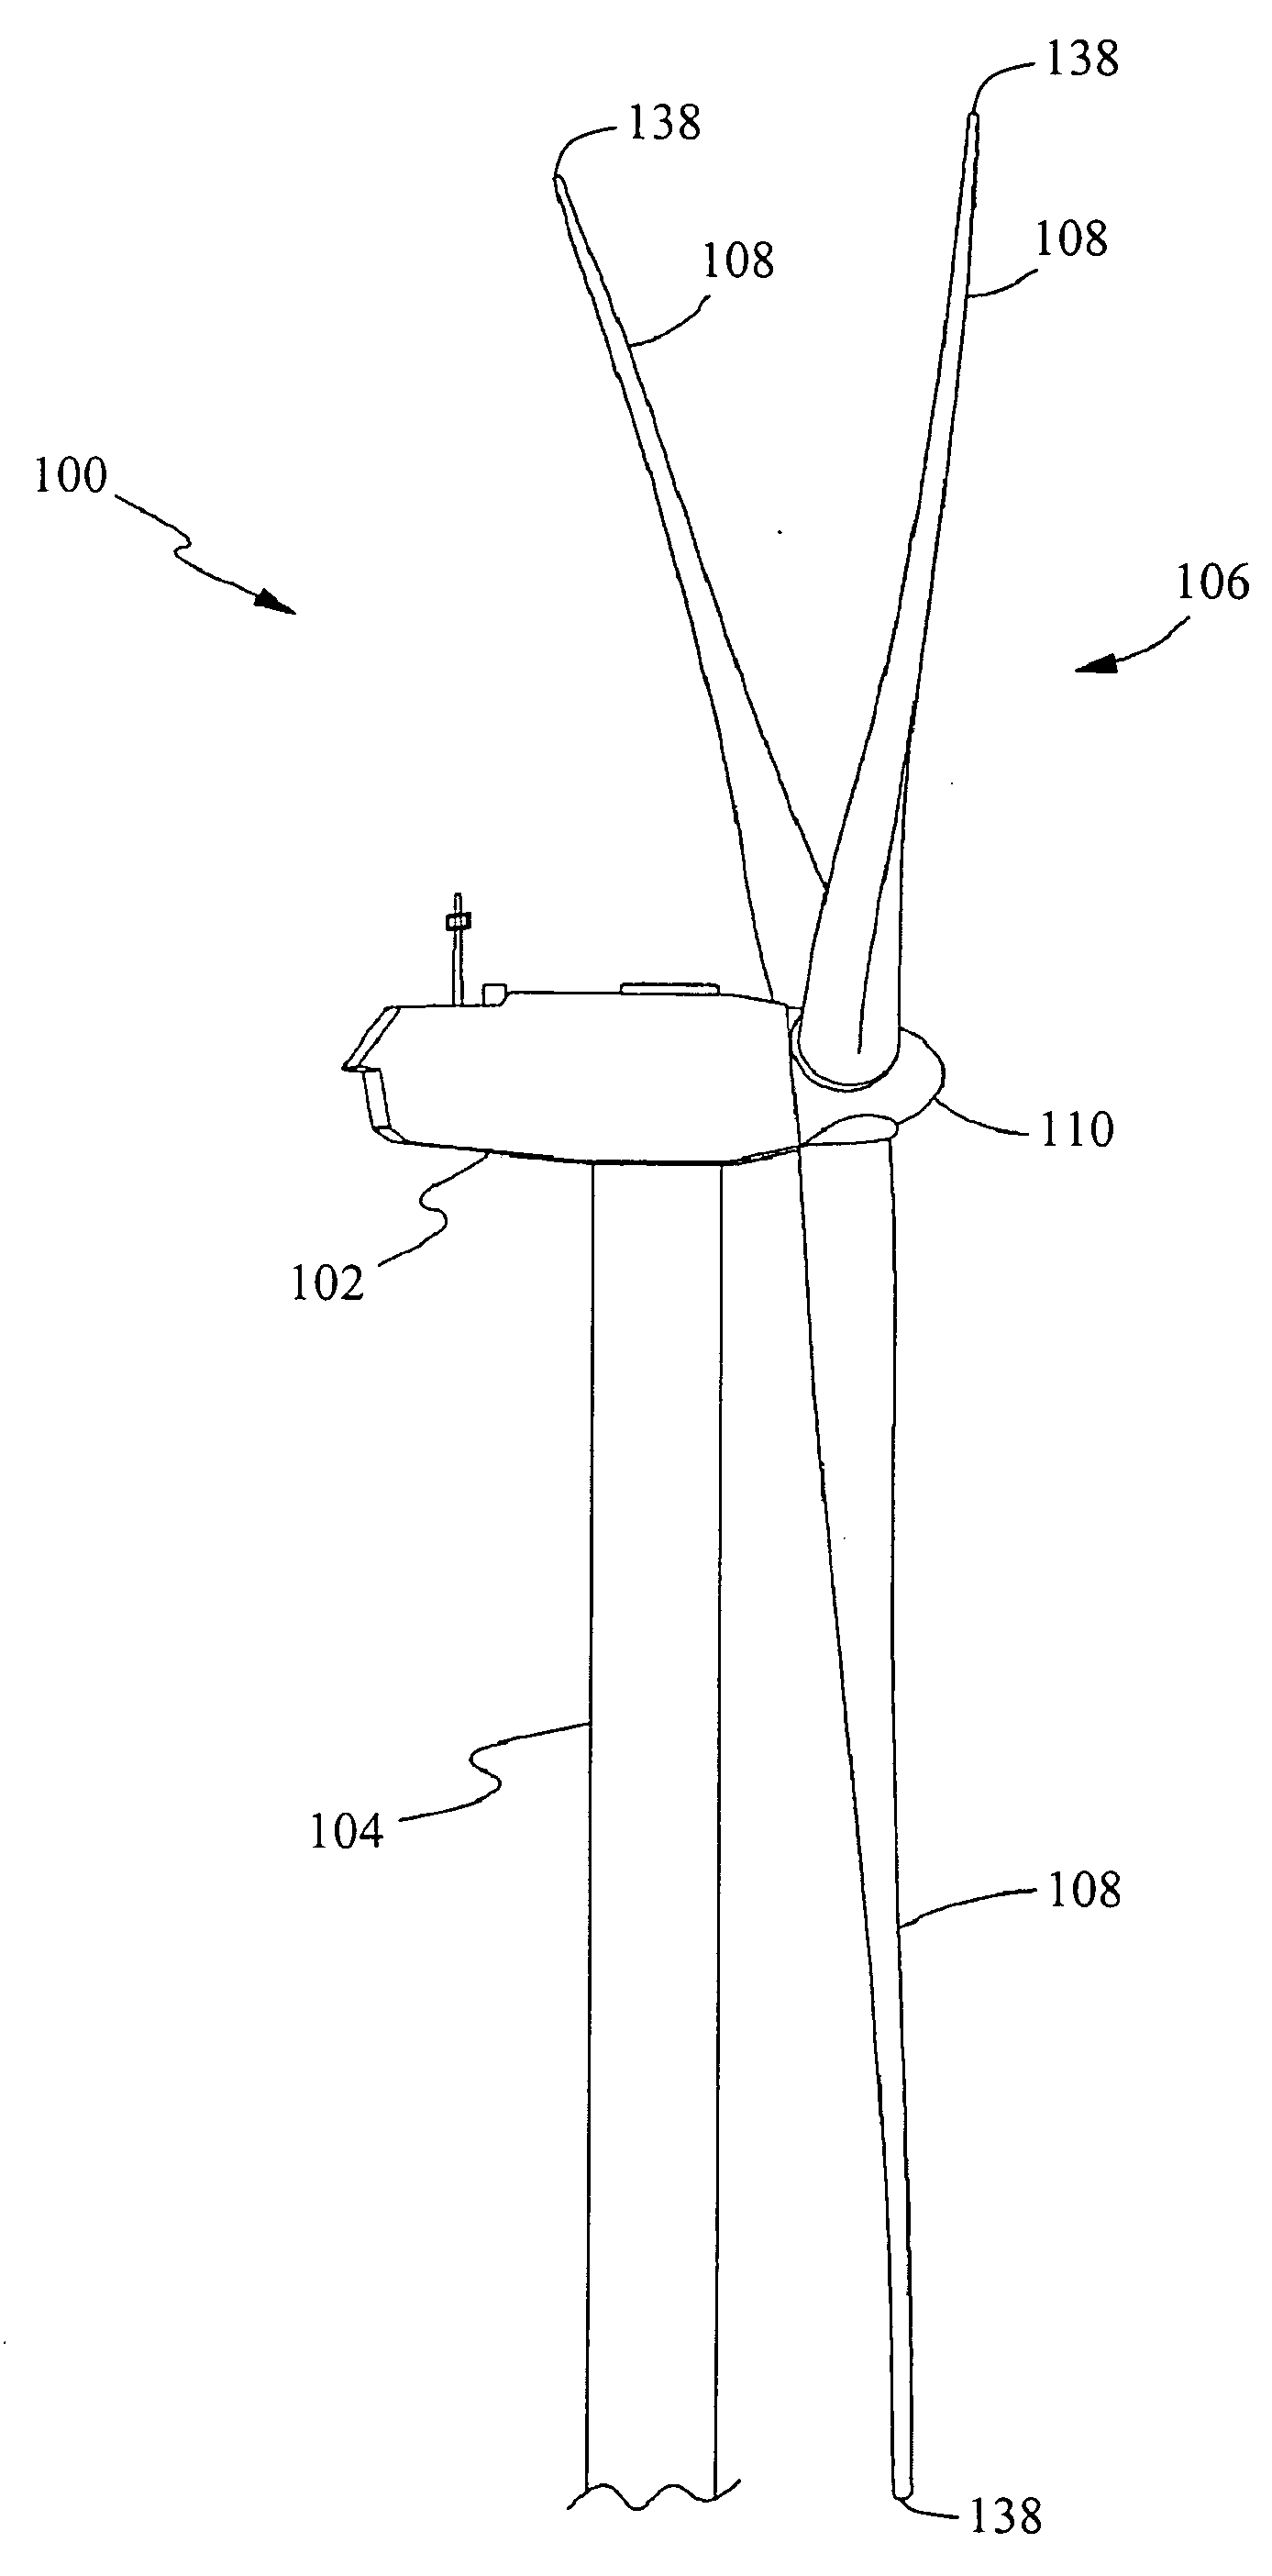 Pitch control battery backup methods and system